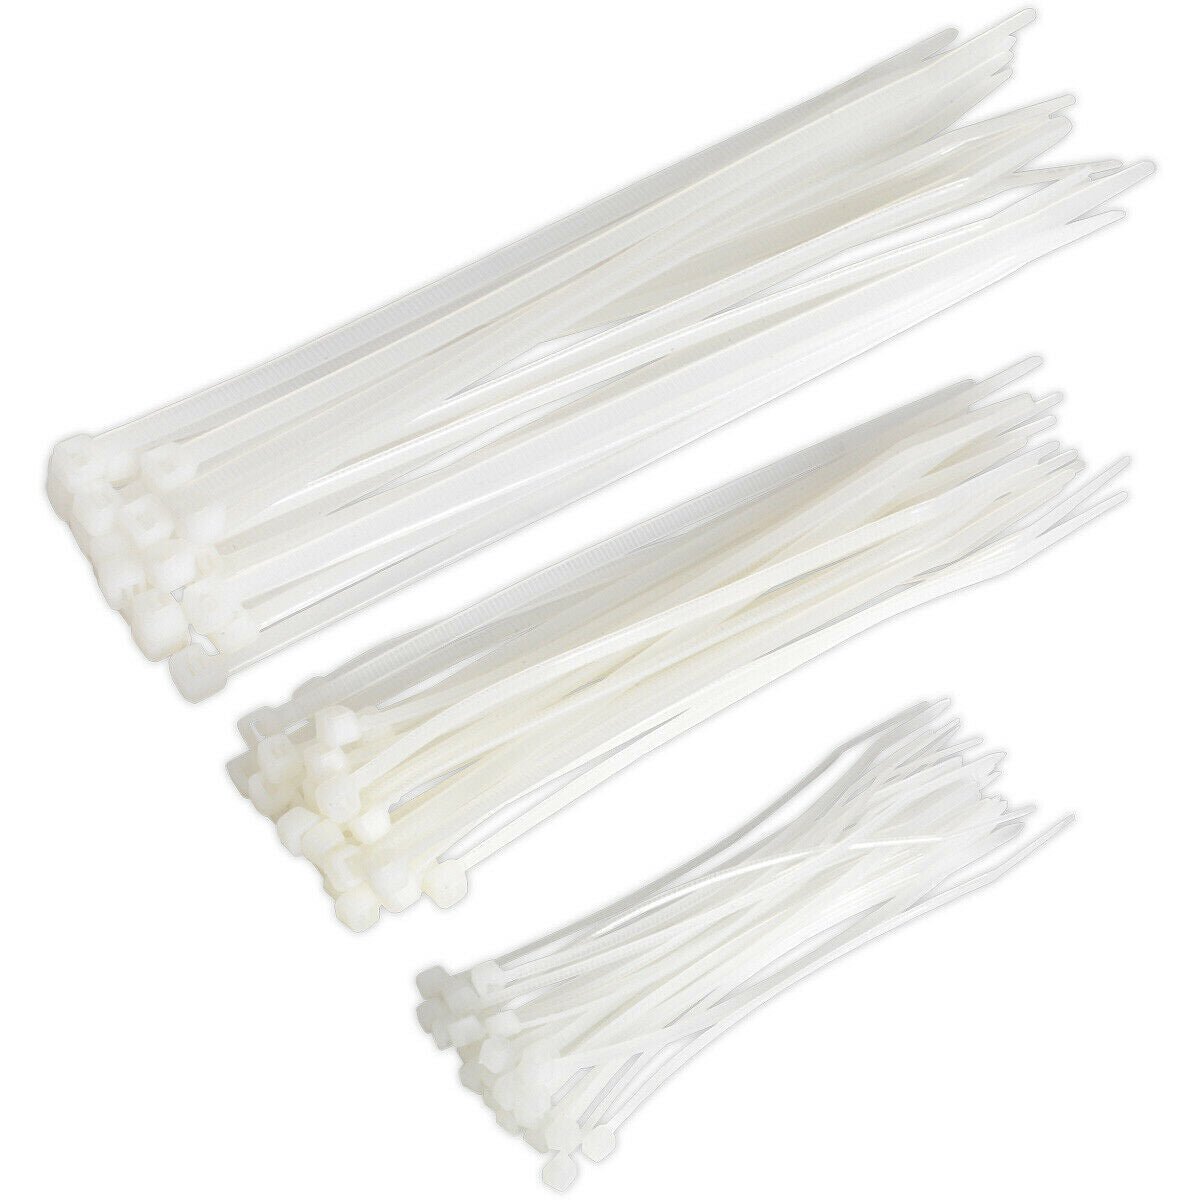 75 Piece White Cable Tie Assortment - Three Sizes - 25 of Each - Electrical Ties